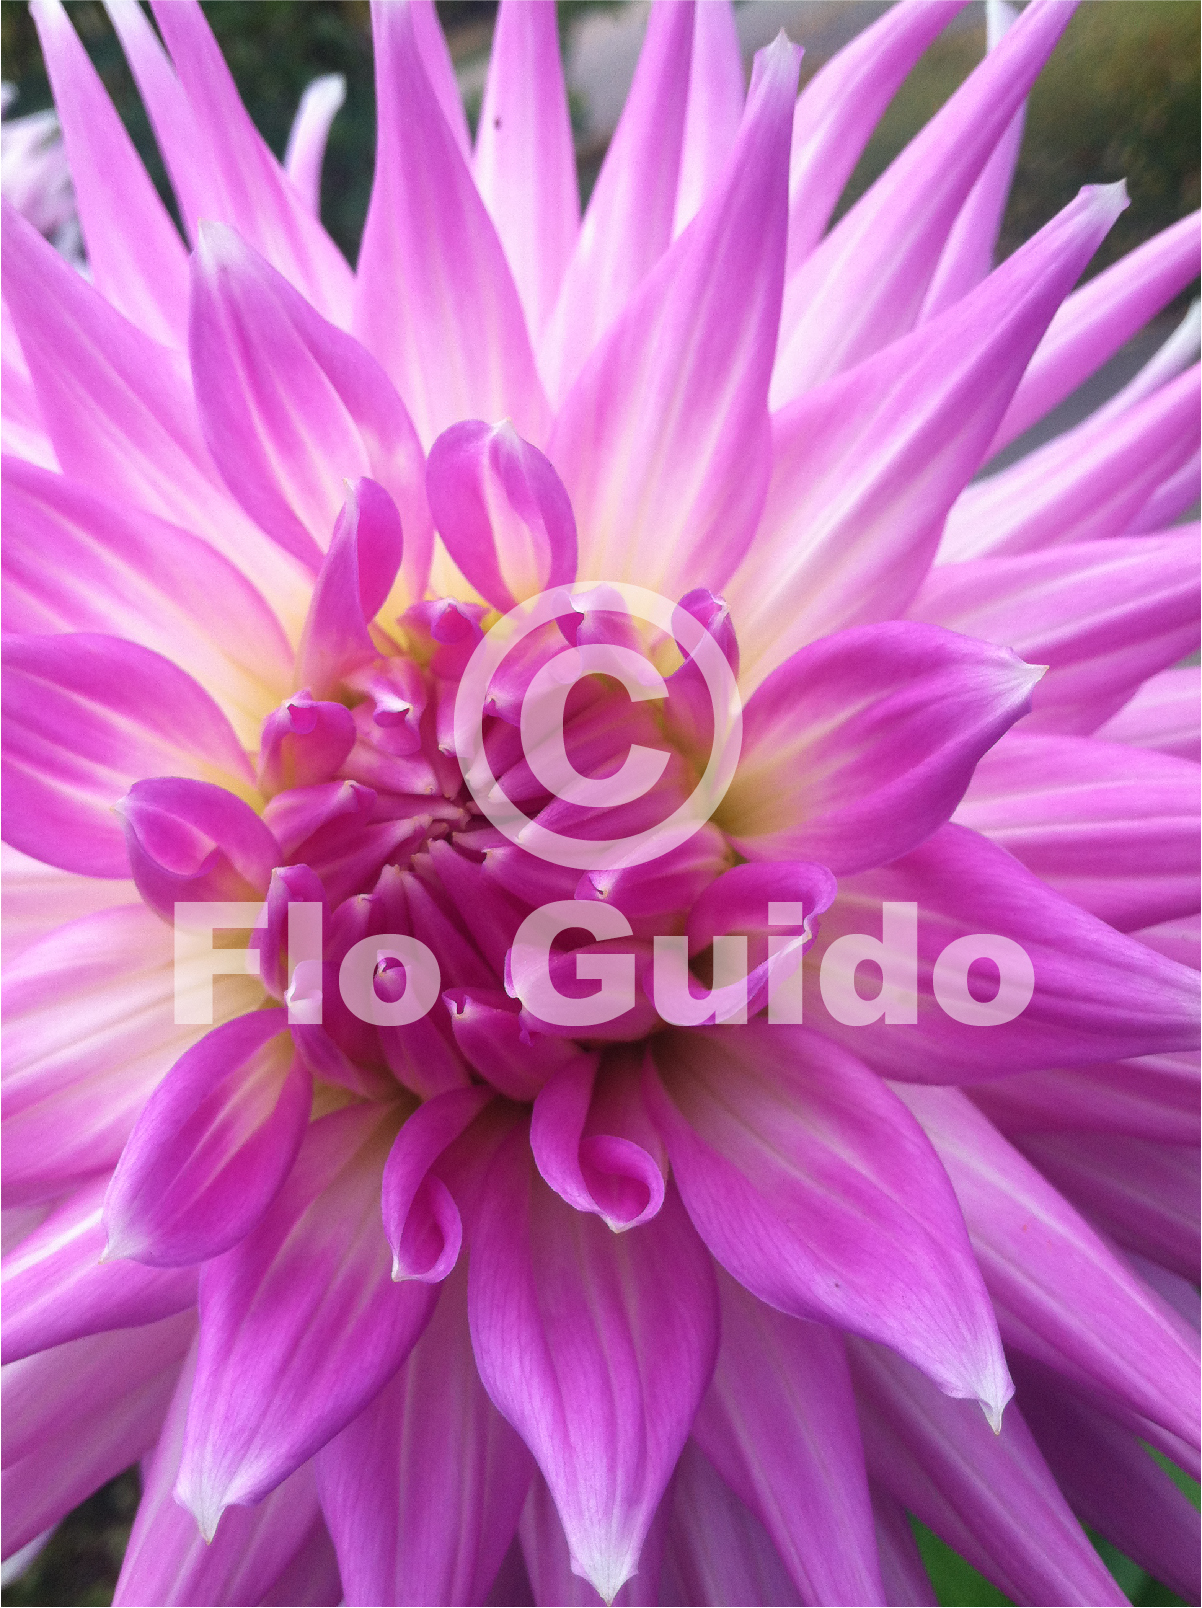 close up image of hot pink flower